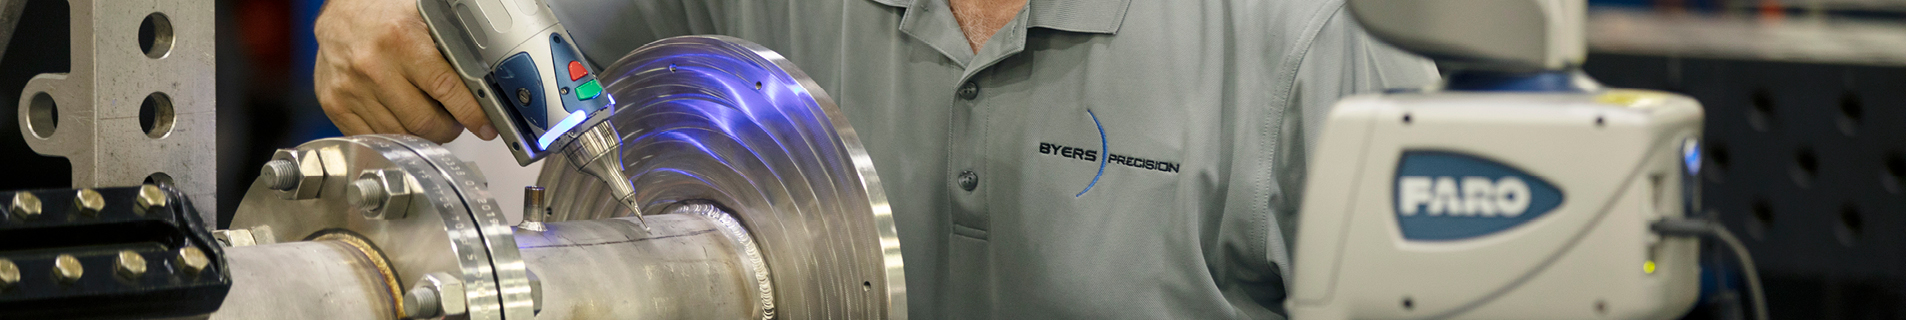 byers precision employee and equipment